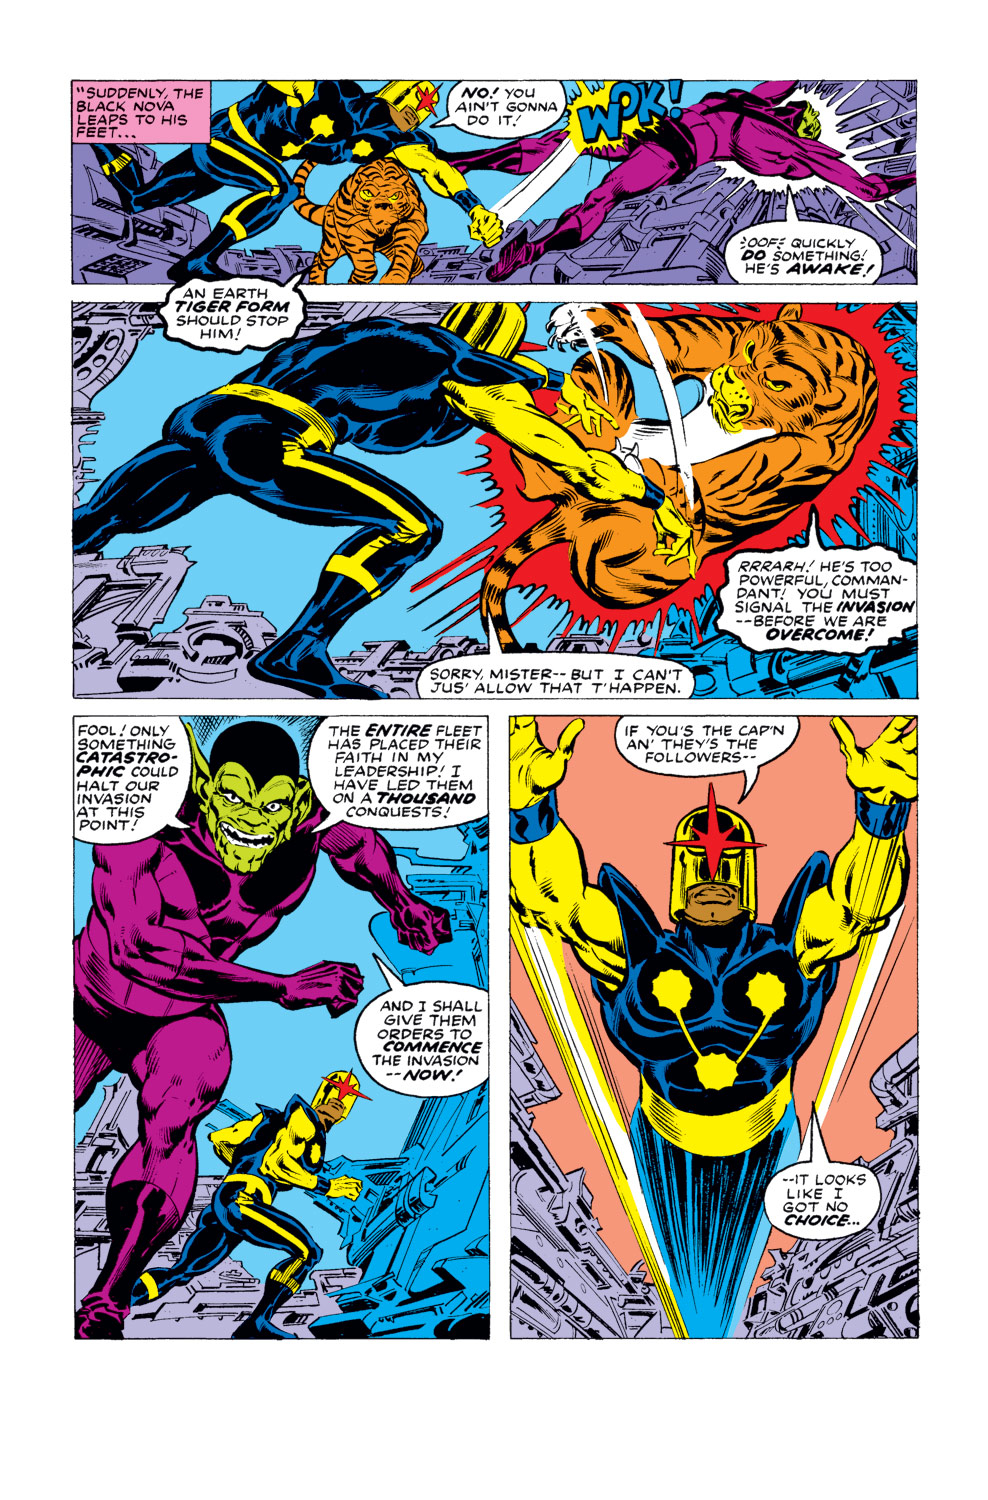 What If? (1977) issue 15 - Nova had been four other people - Page 19